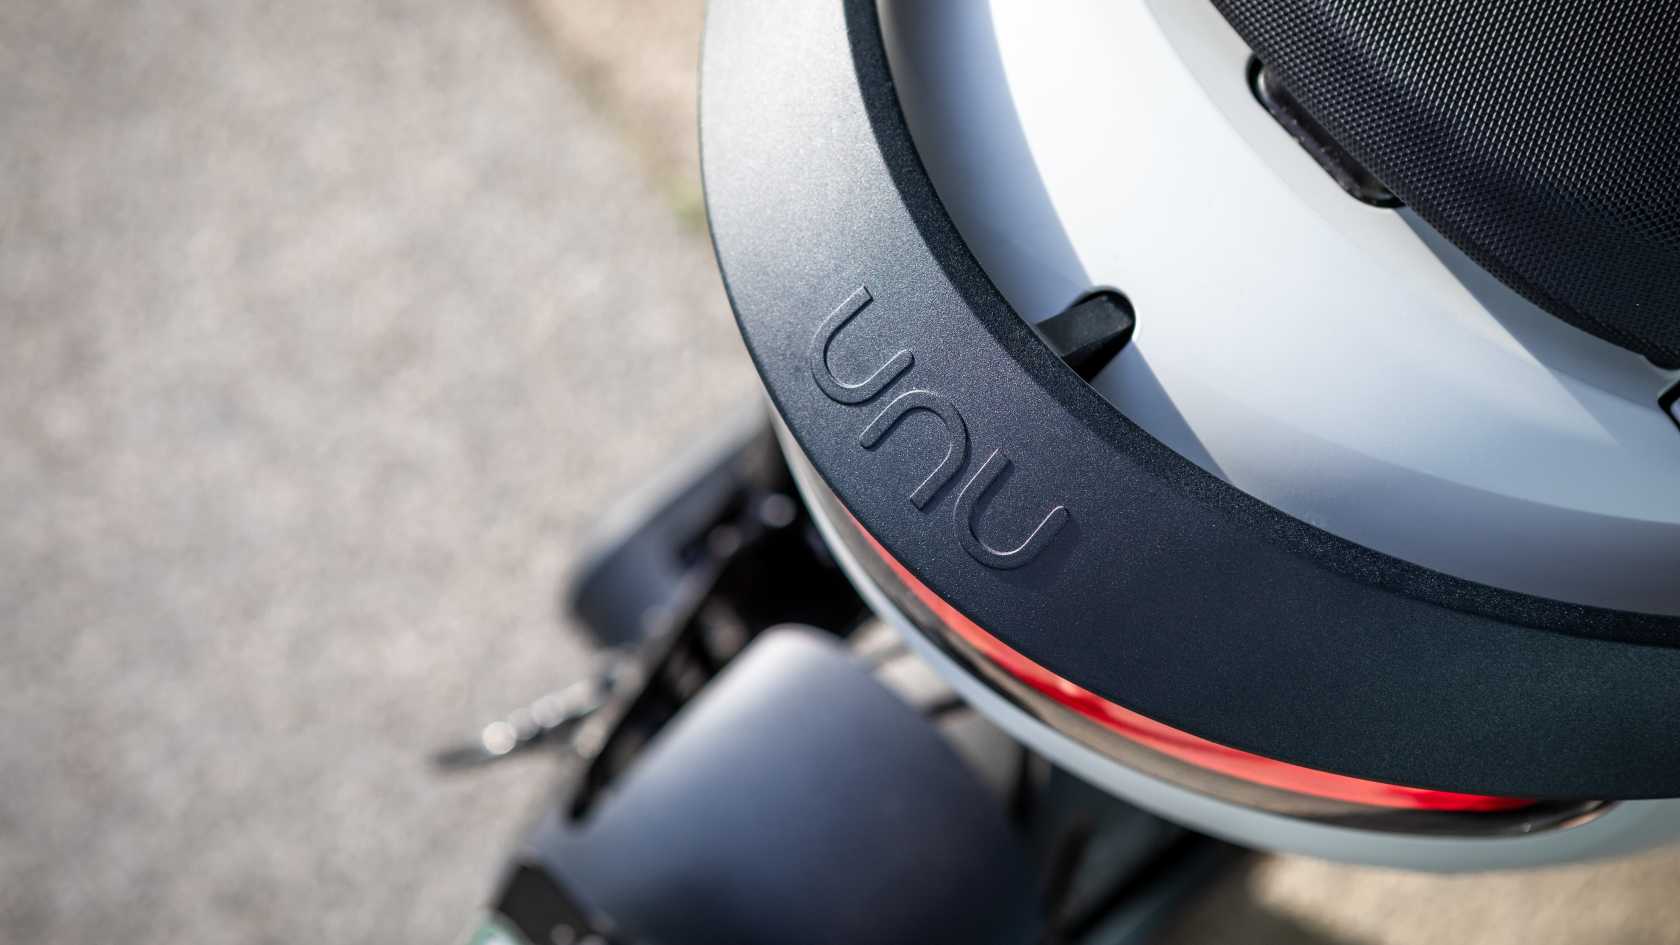 No matter if you choose a unu Move or unu Pro, both scooters are designed in the unique unu style. Become part of the unu community, with more than a thousand unu riders already on Europe's roads.